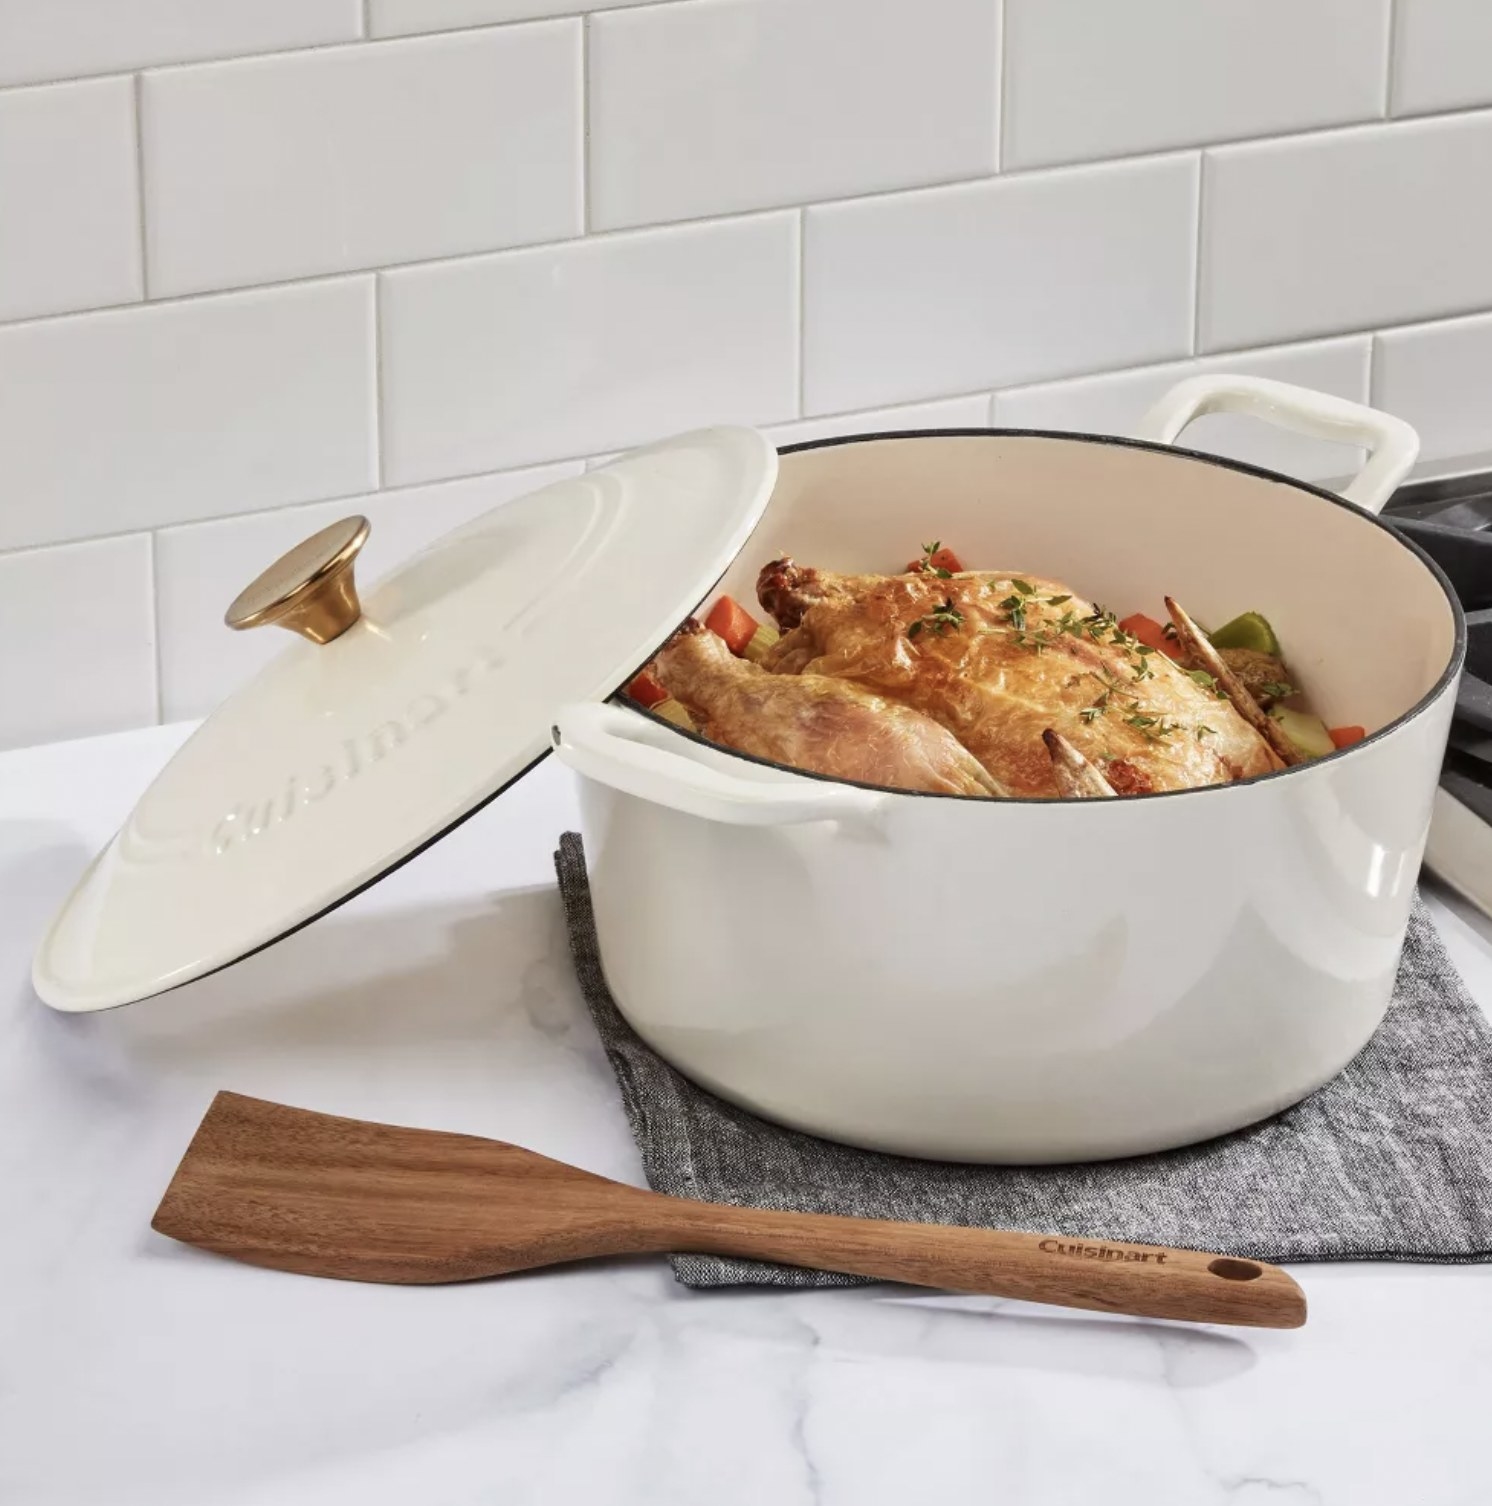 The white casserole dish with roast chicken and veggies resting on counter